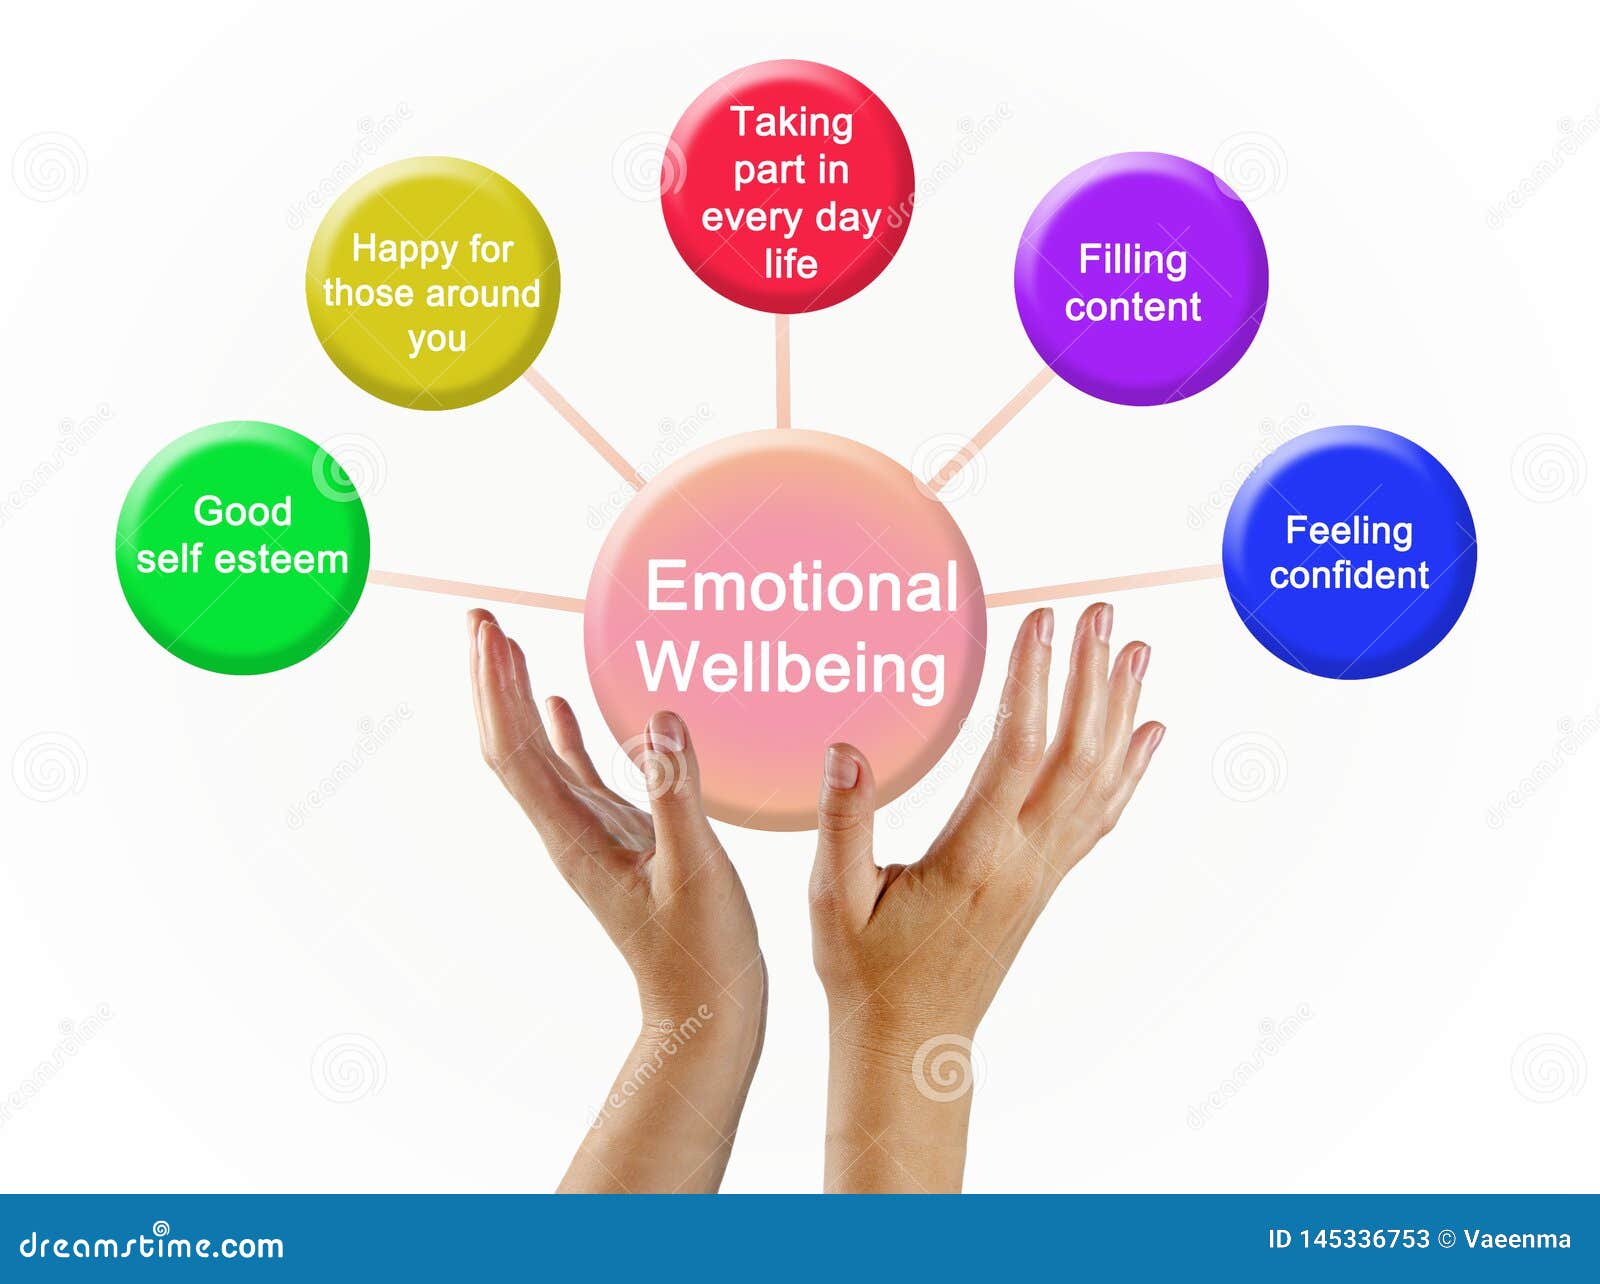 drivers of emotional wellbeing